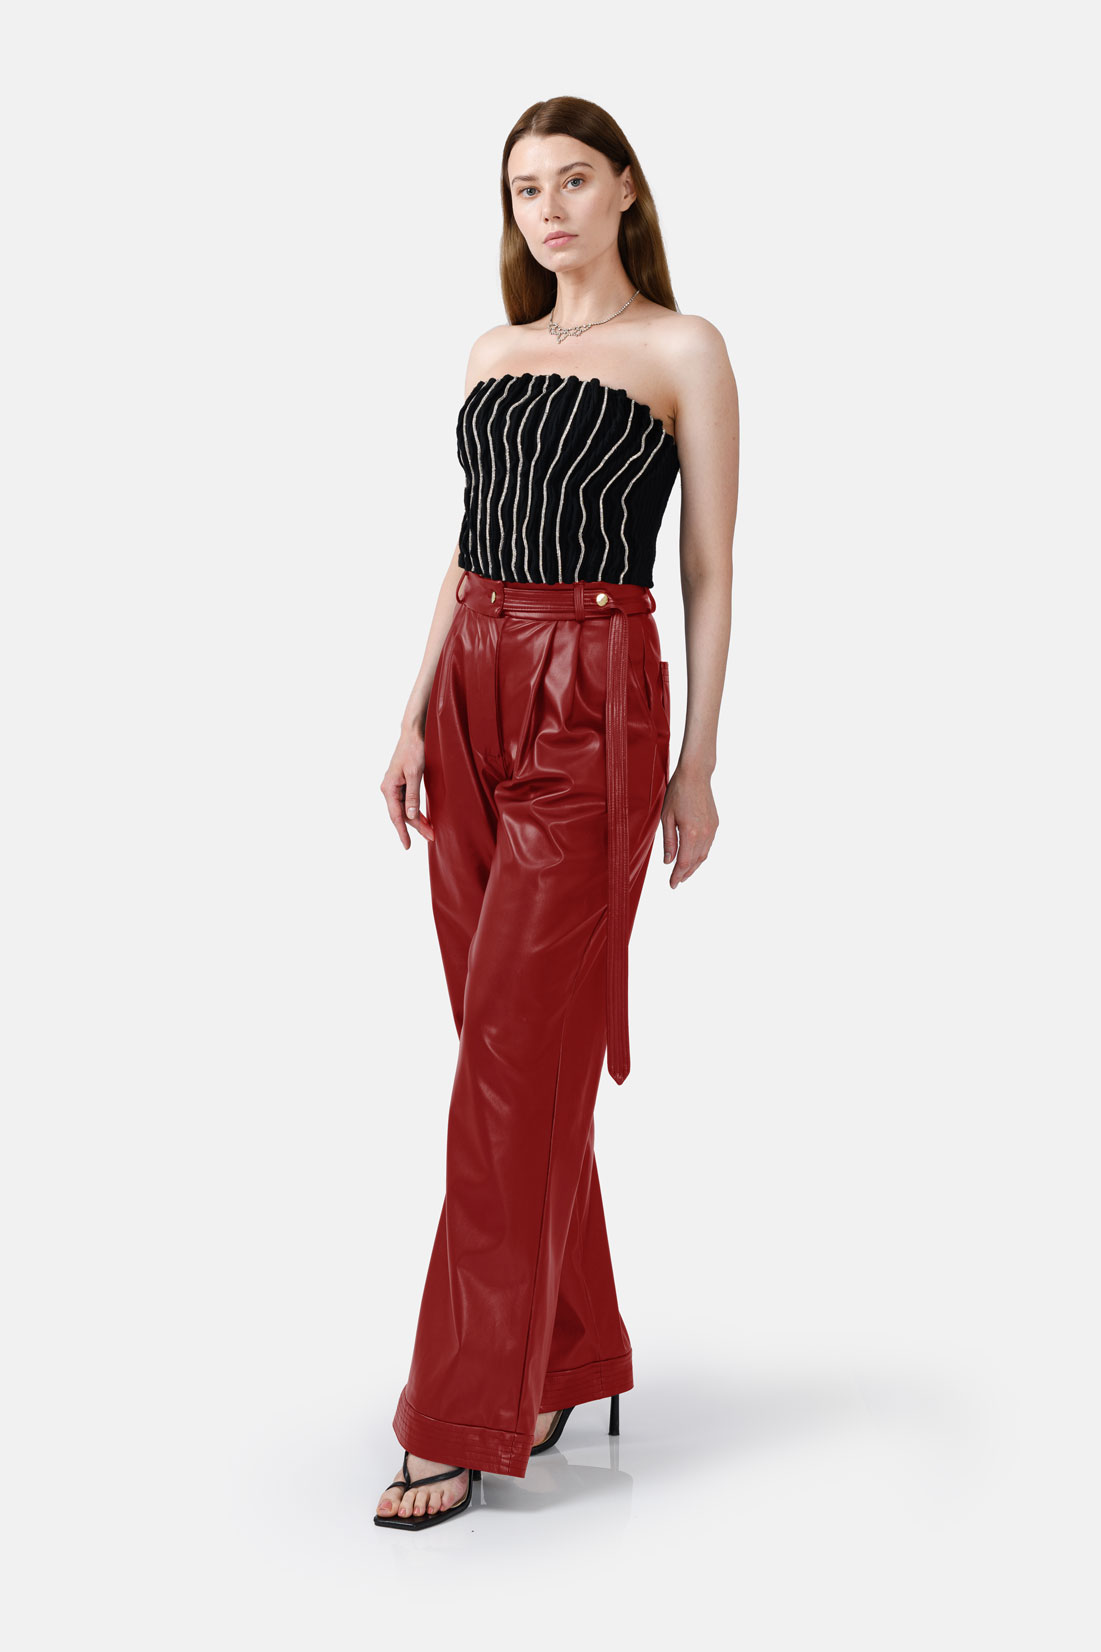 Zara Red Leather pants